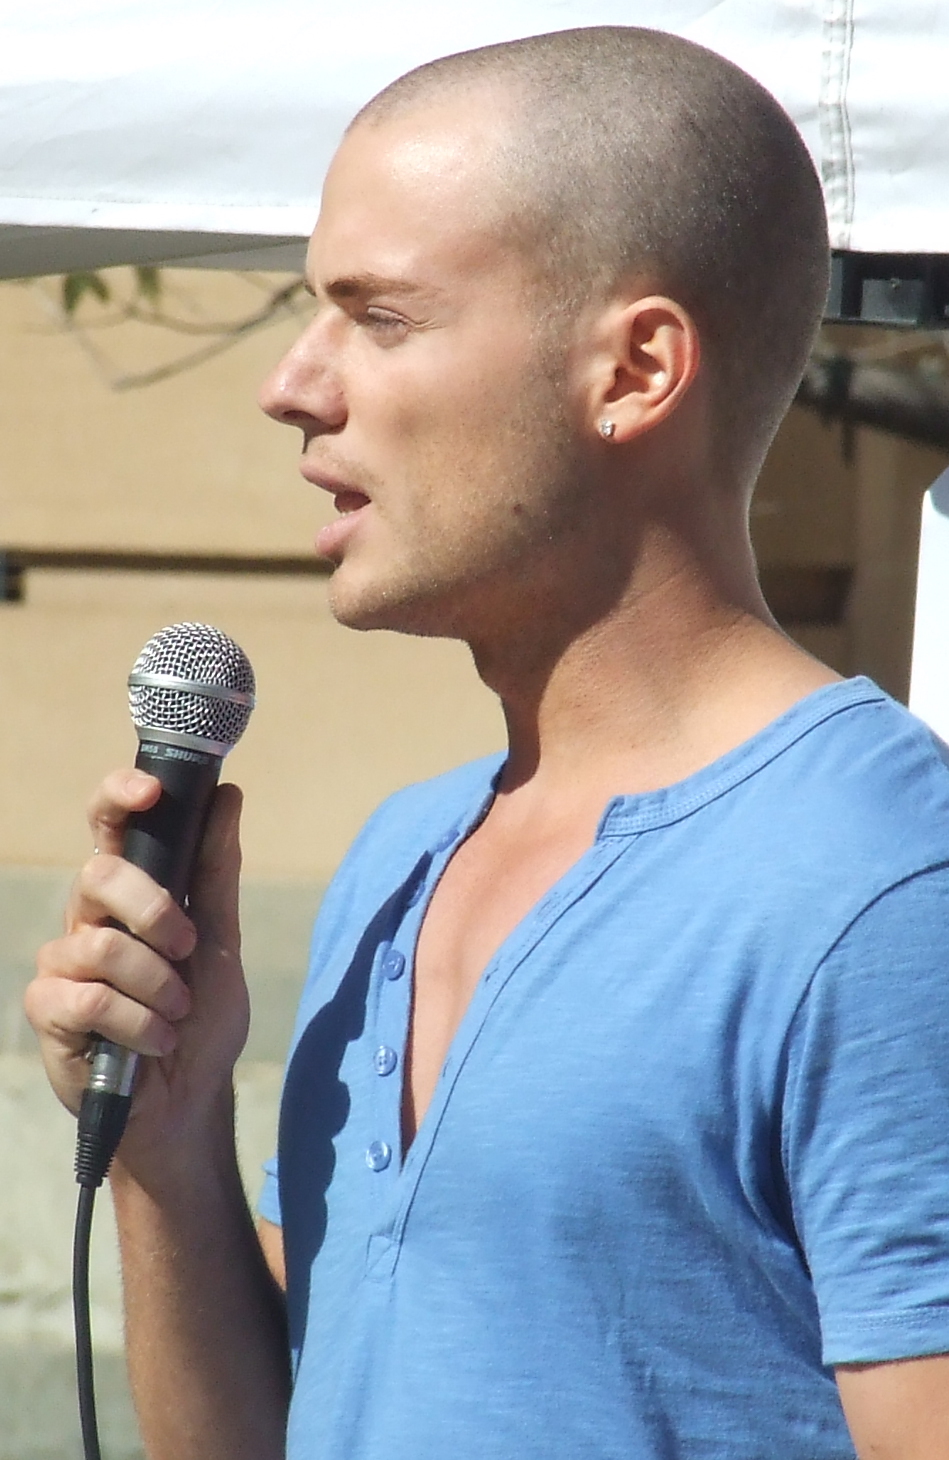 a bald man is holding a microphone at an outdoor event